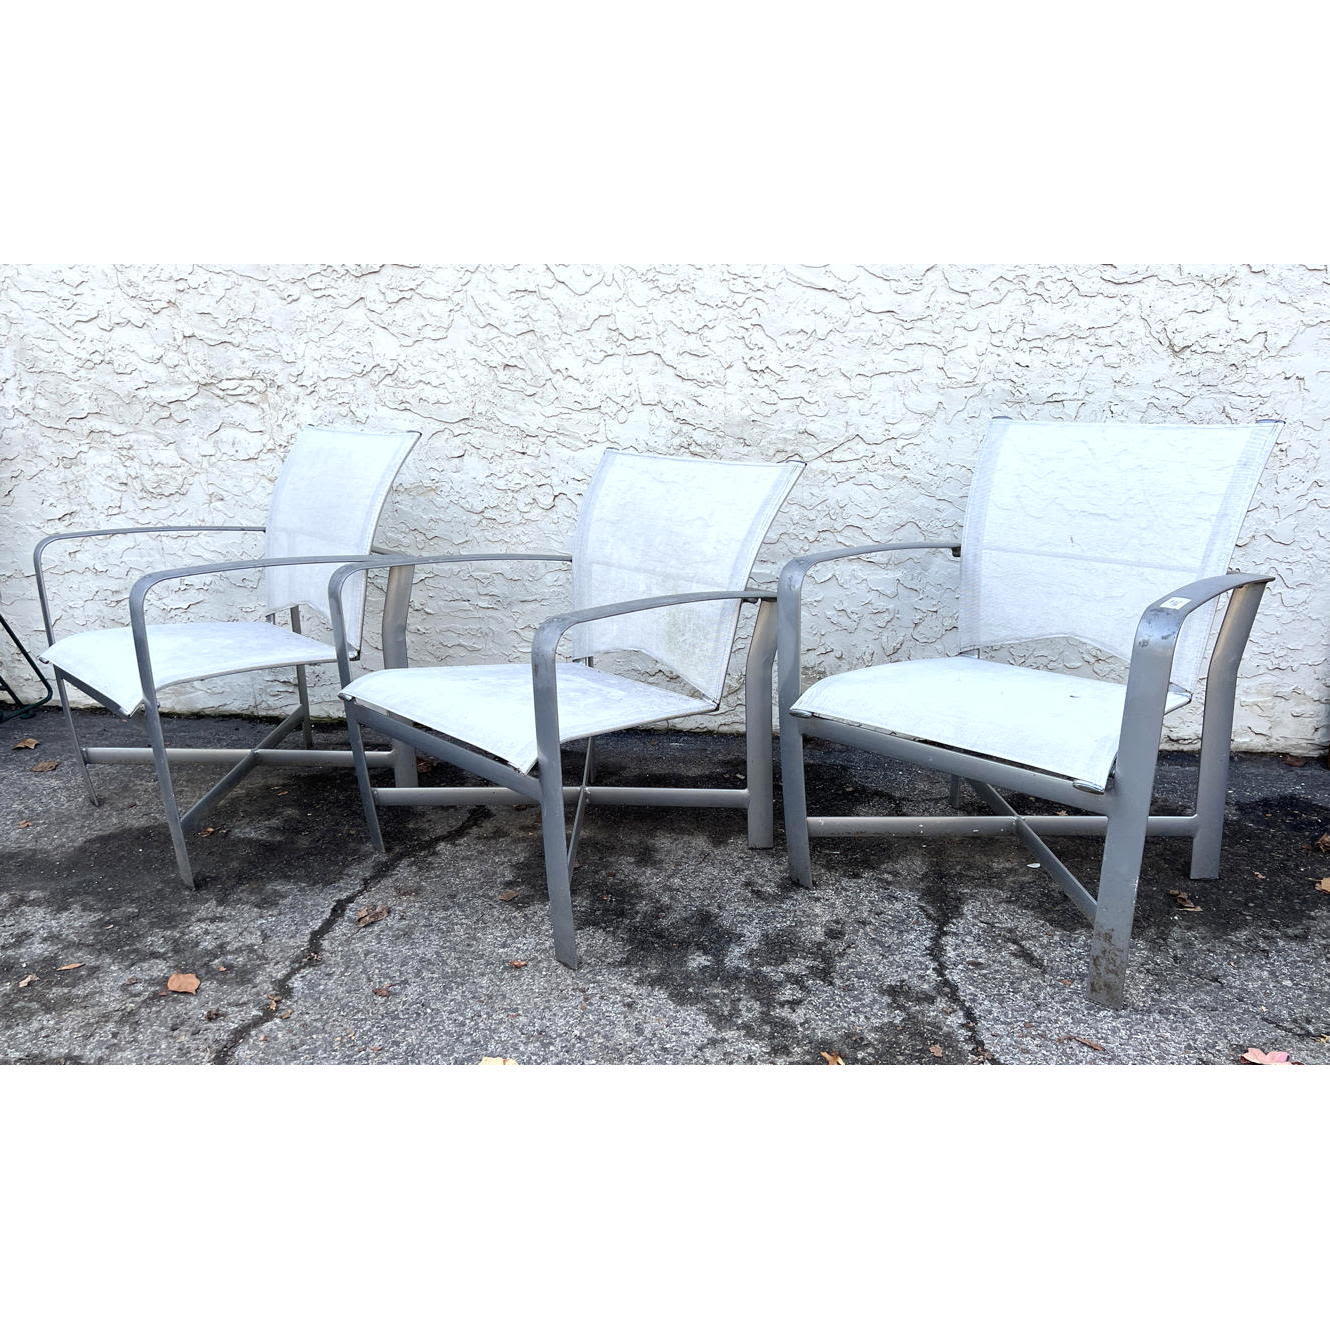 set 3 outdoor Patio Lounge Chairs. Mesh